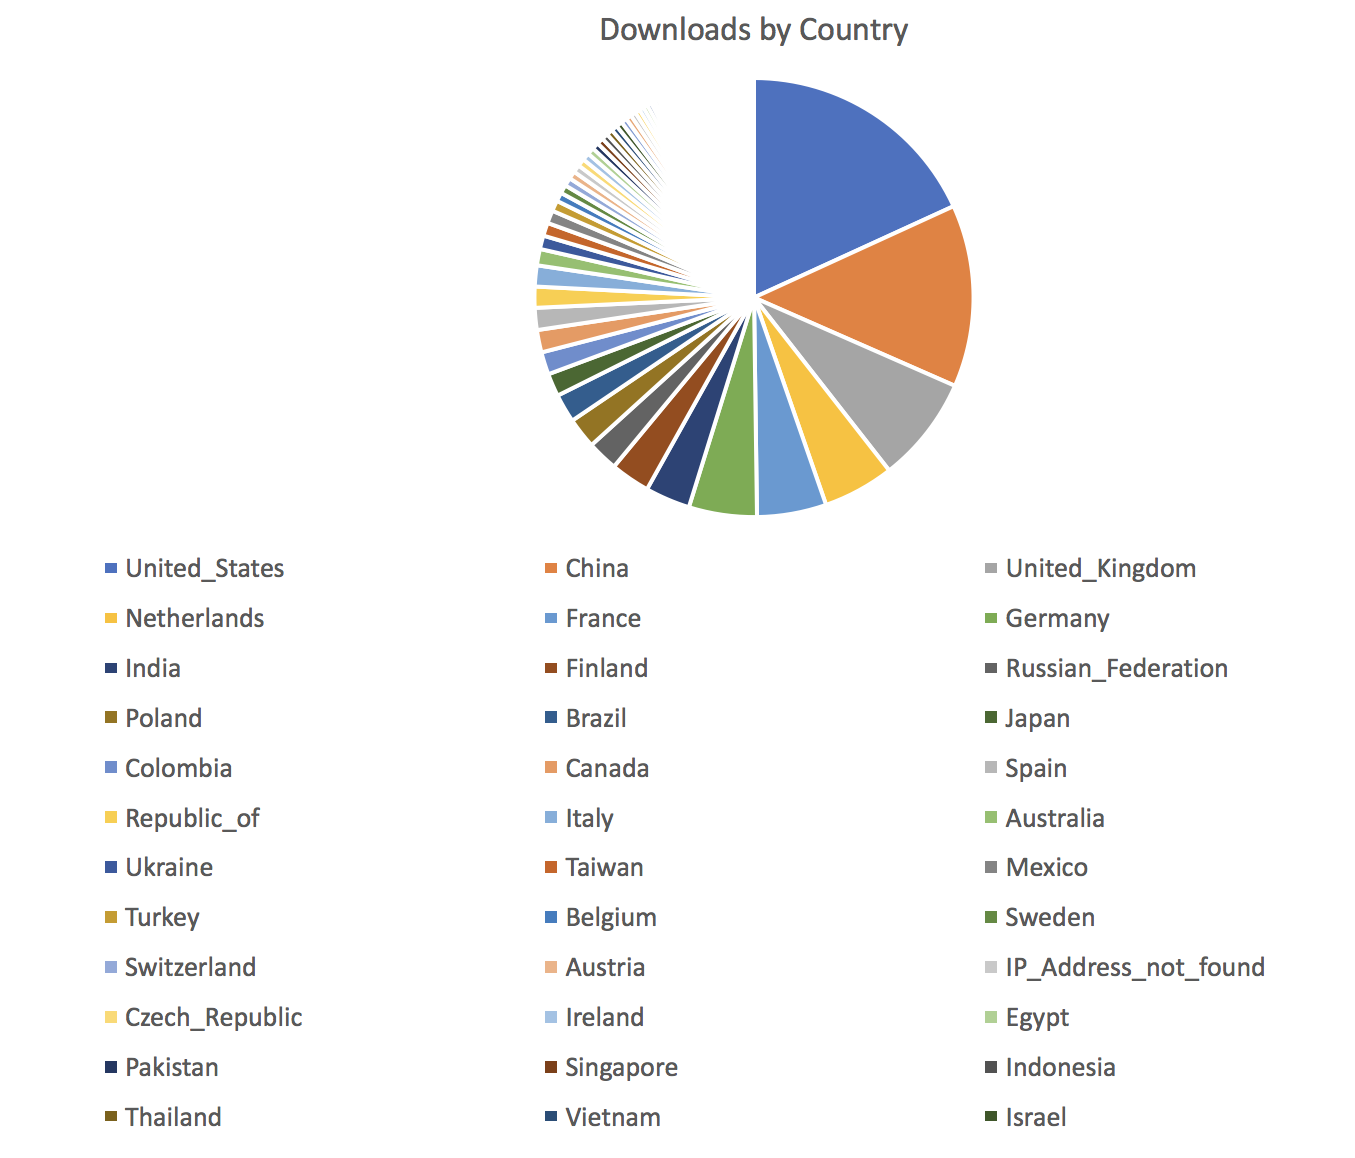 pie chart for downloads by country